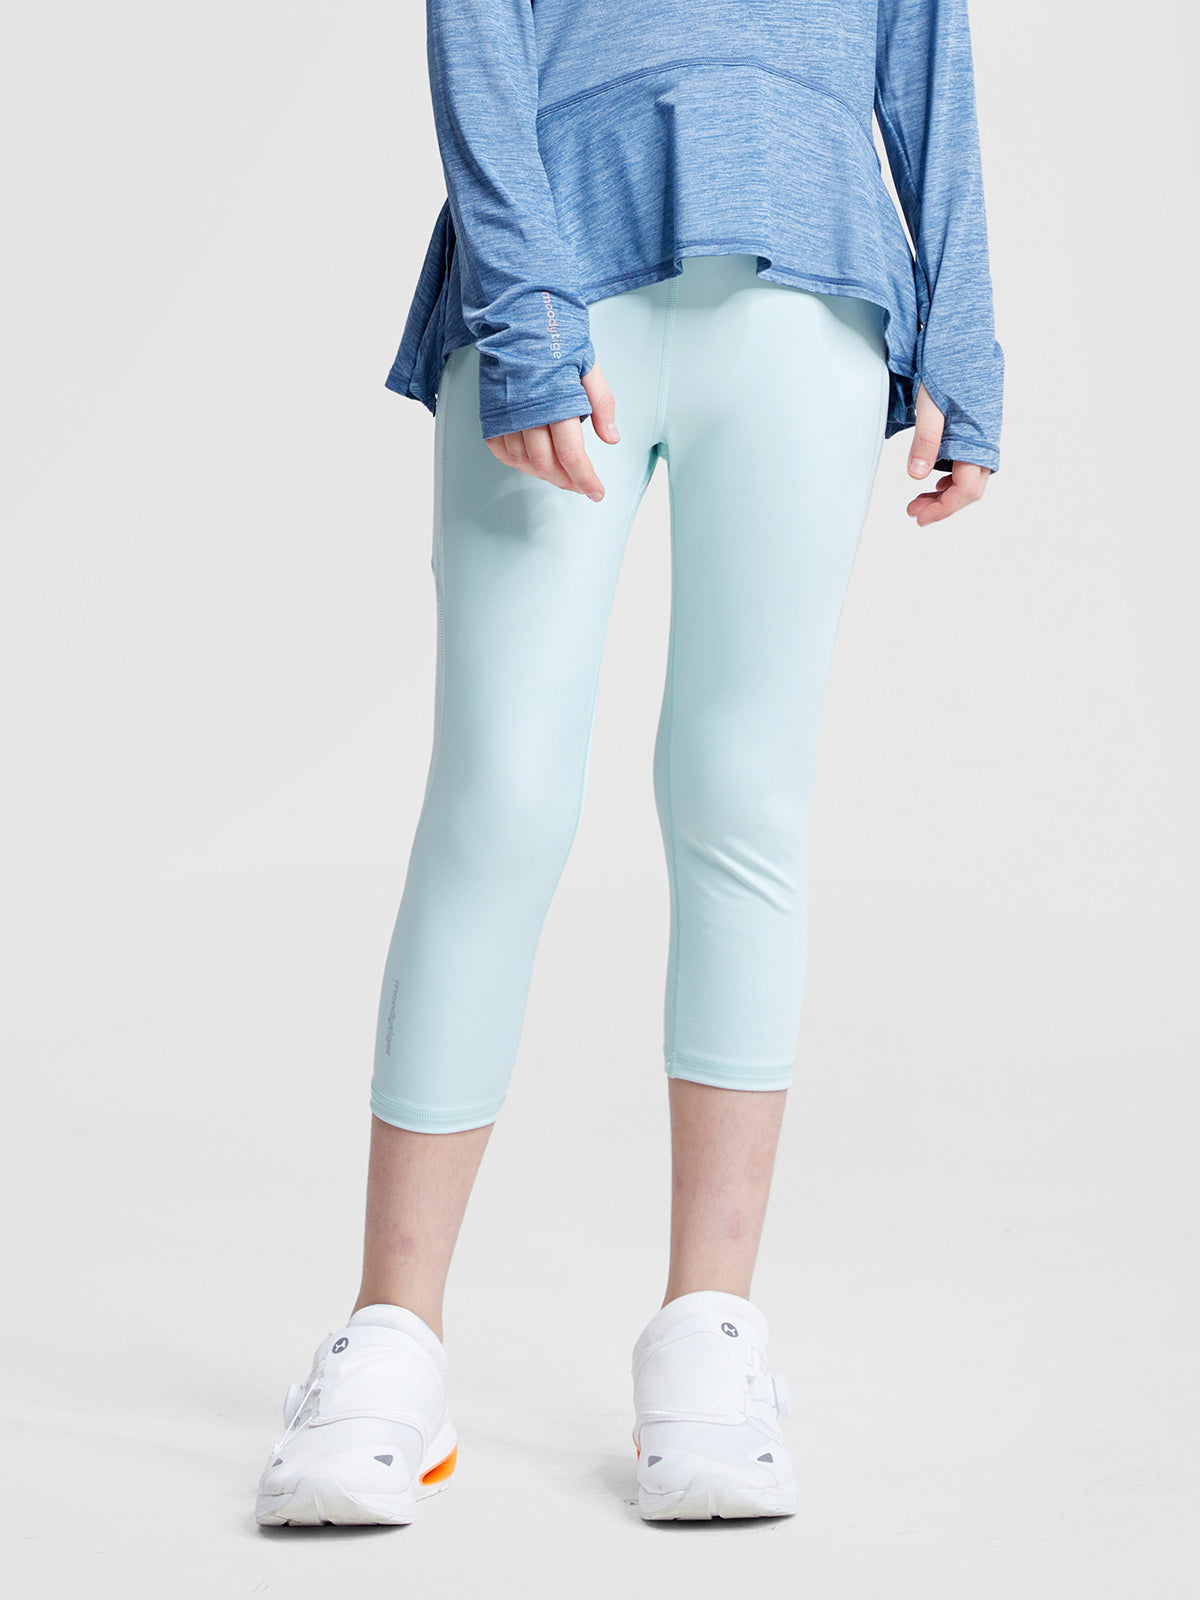 HEAVENLY On Style Cropped Leggings